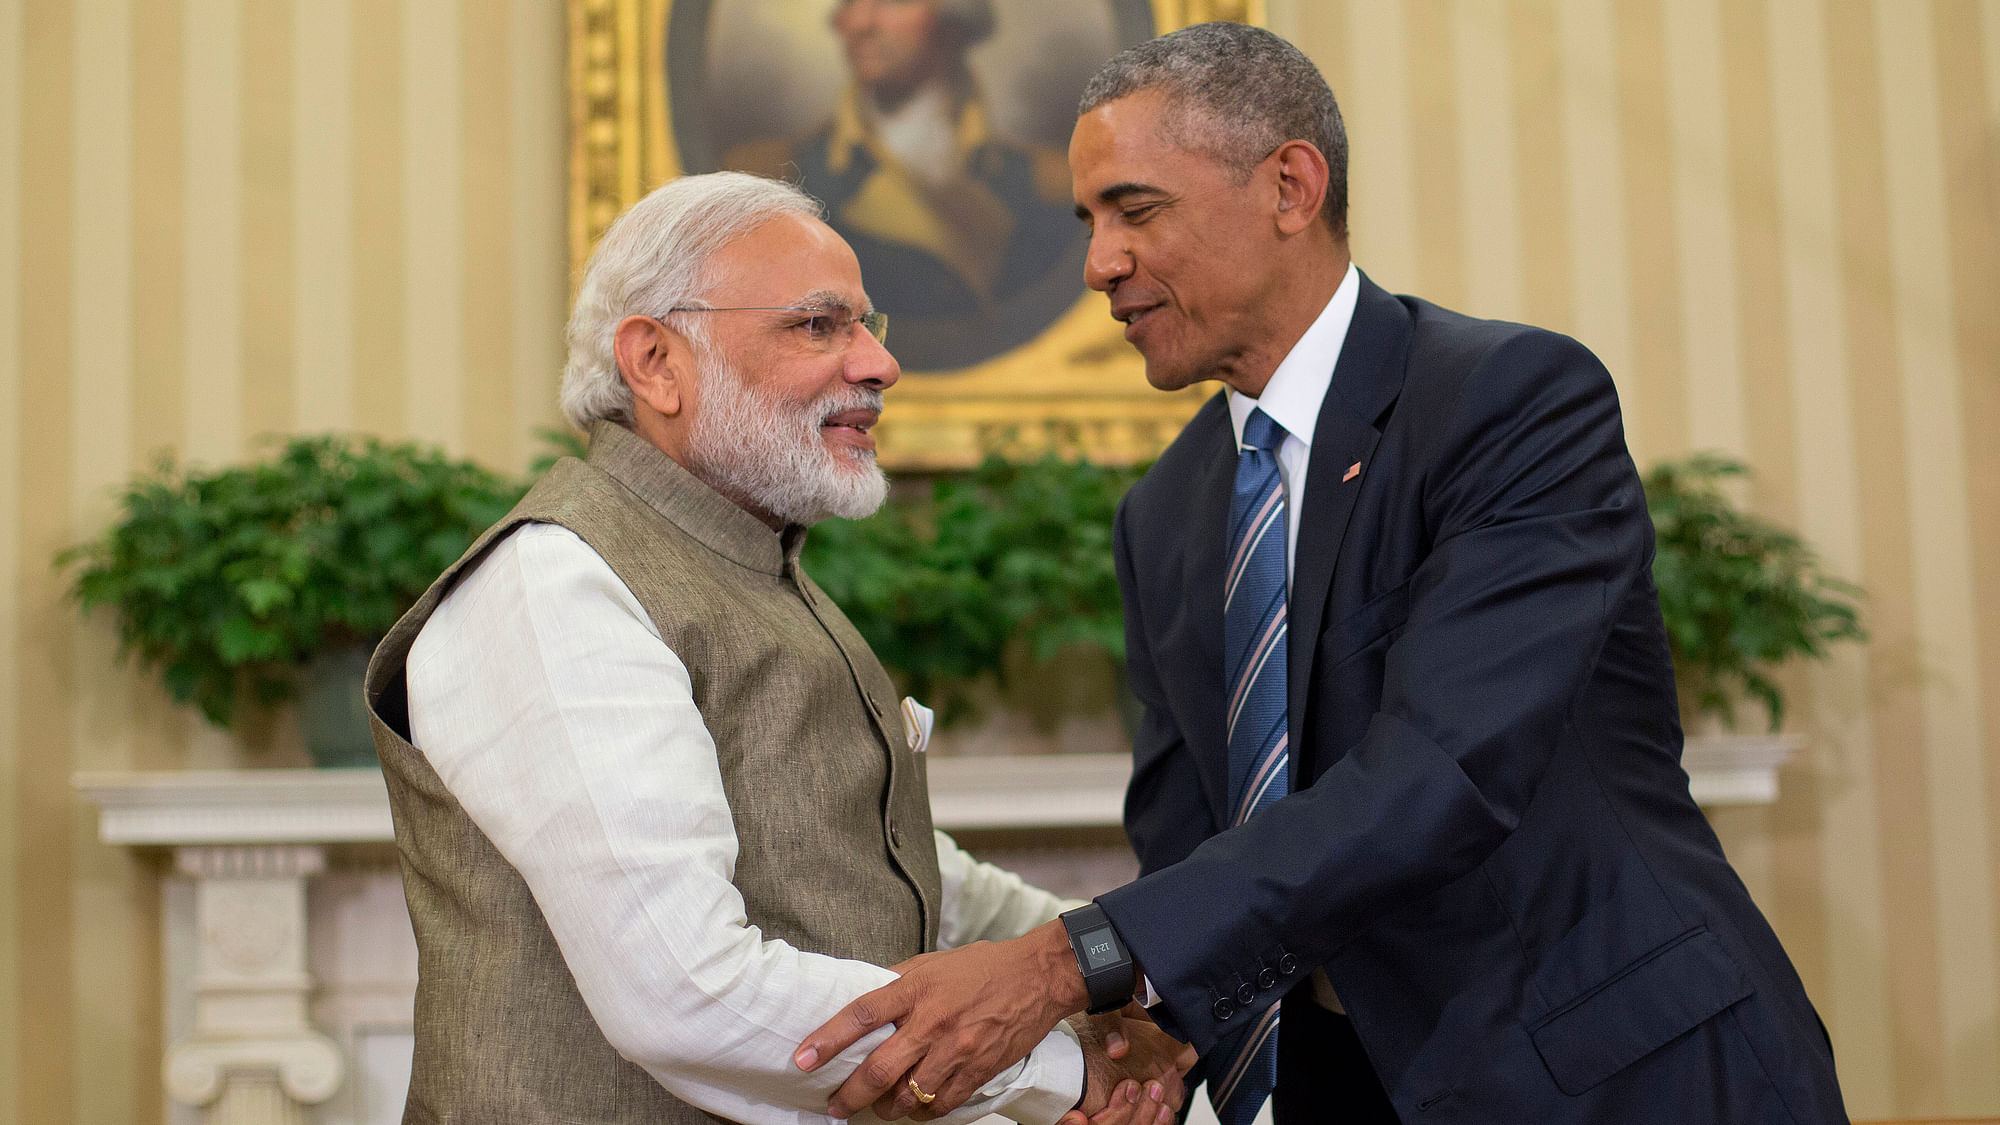 US President Barack Obama and Indian Prime Minister India Narendra Modi shake hands before their meeting in the Oval Office of the White House. (Photo: AP)